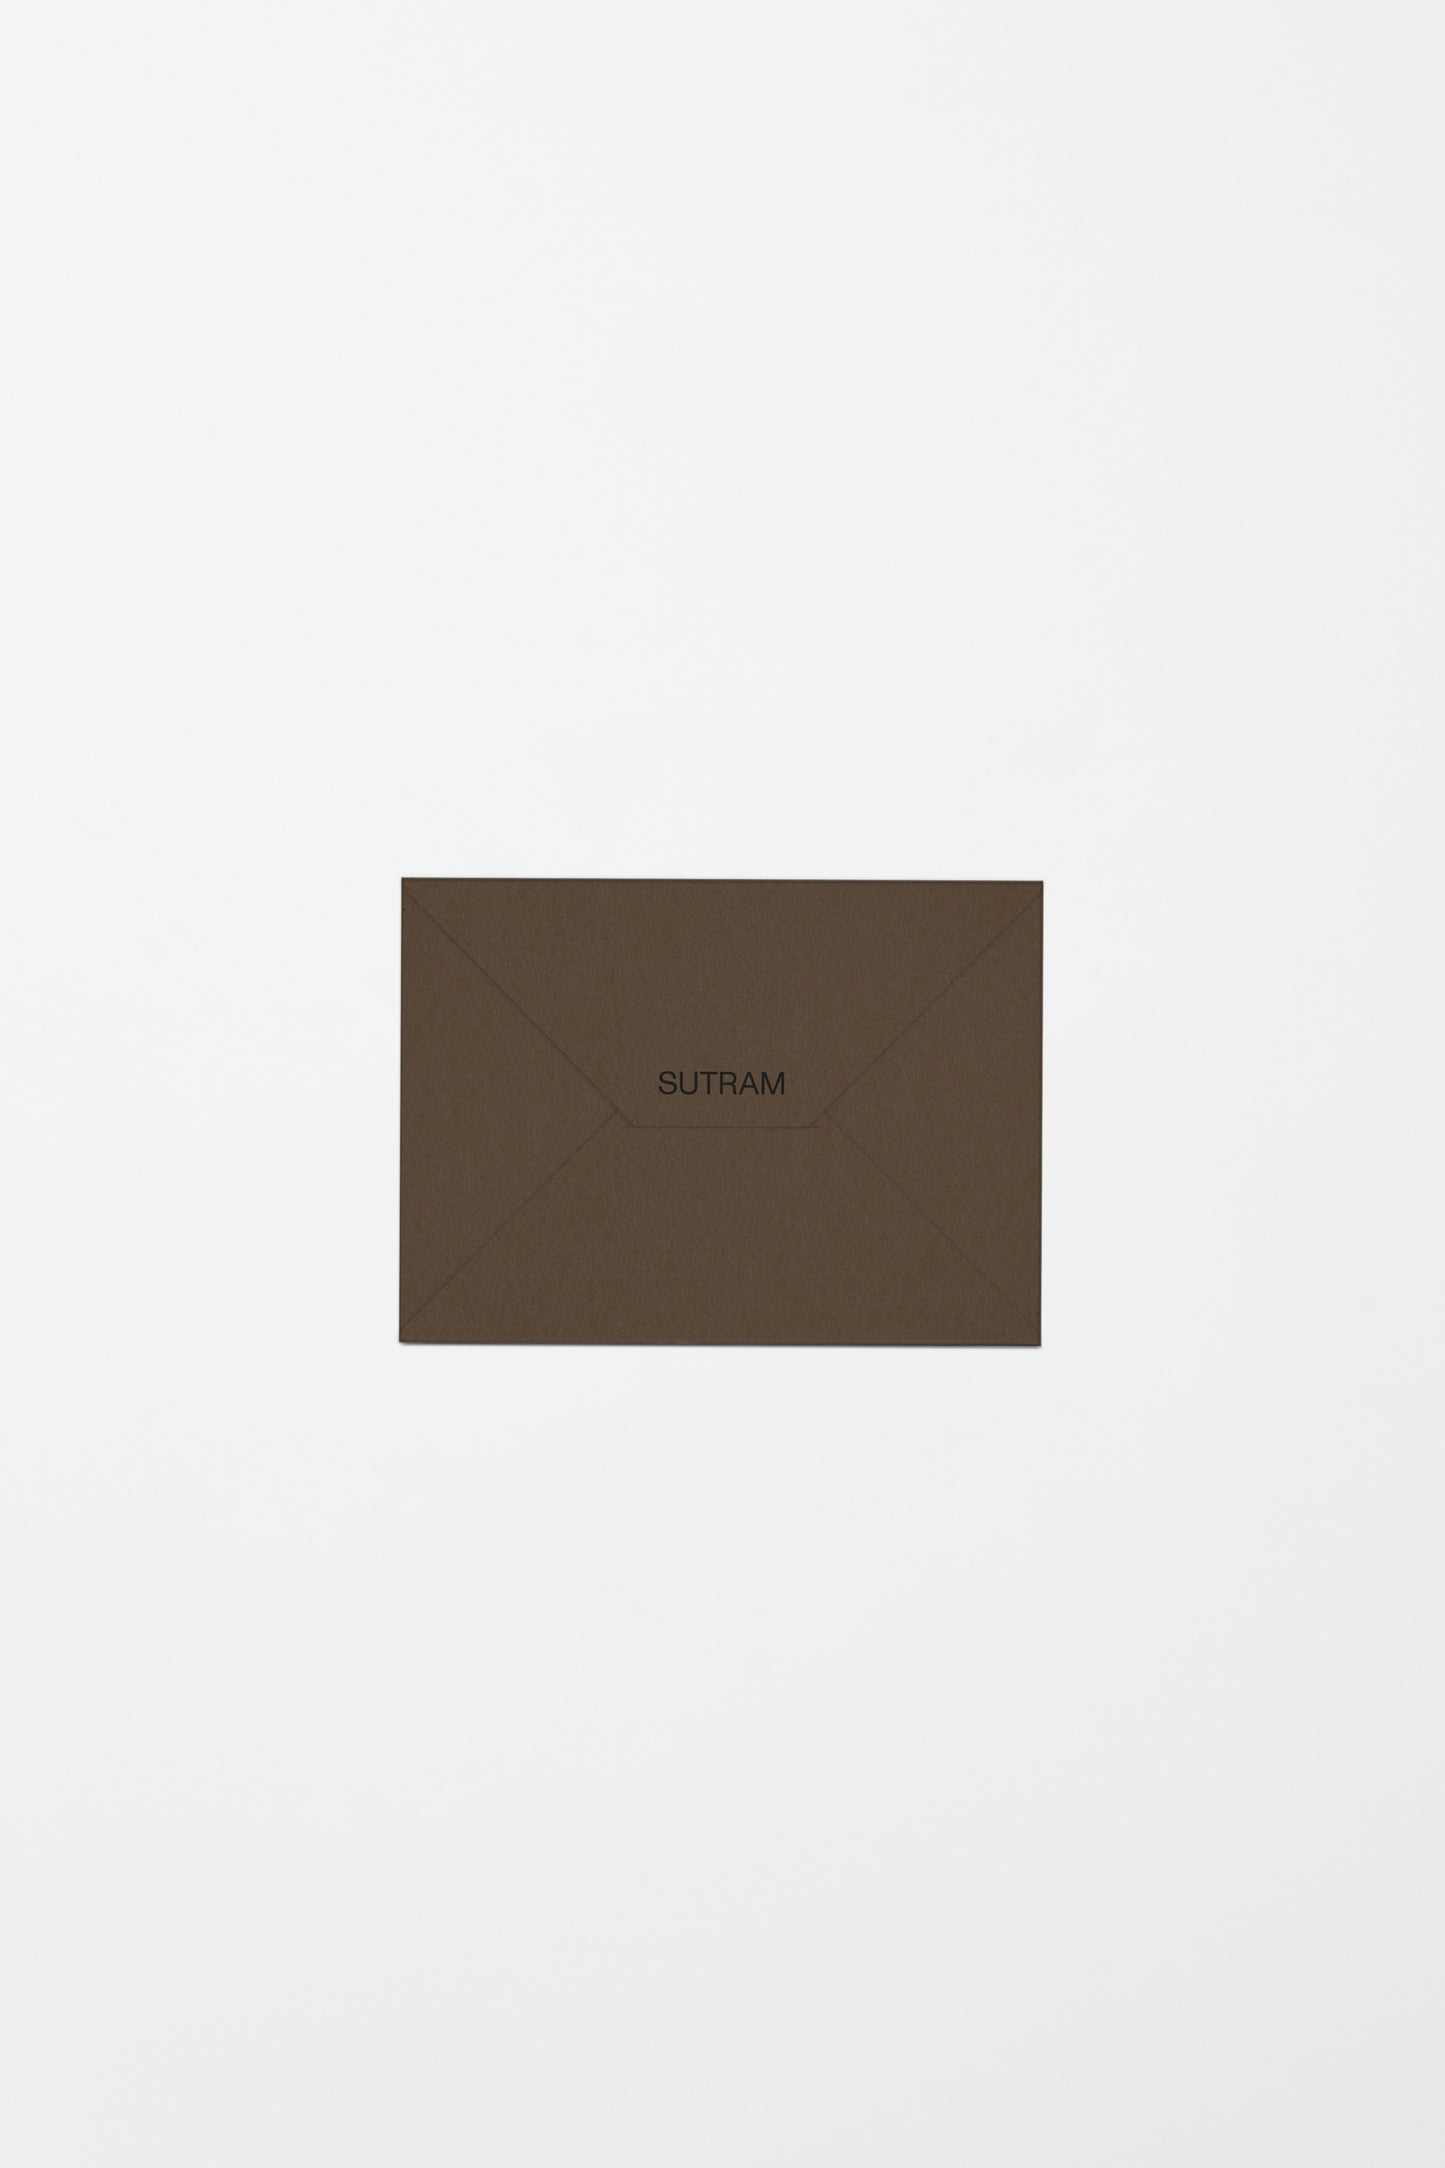 Gift Card (physical)